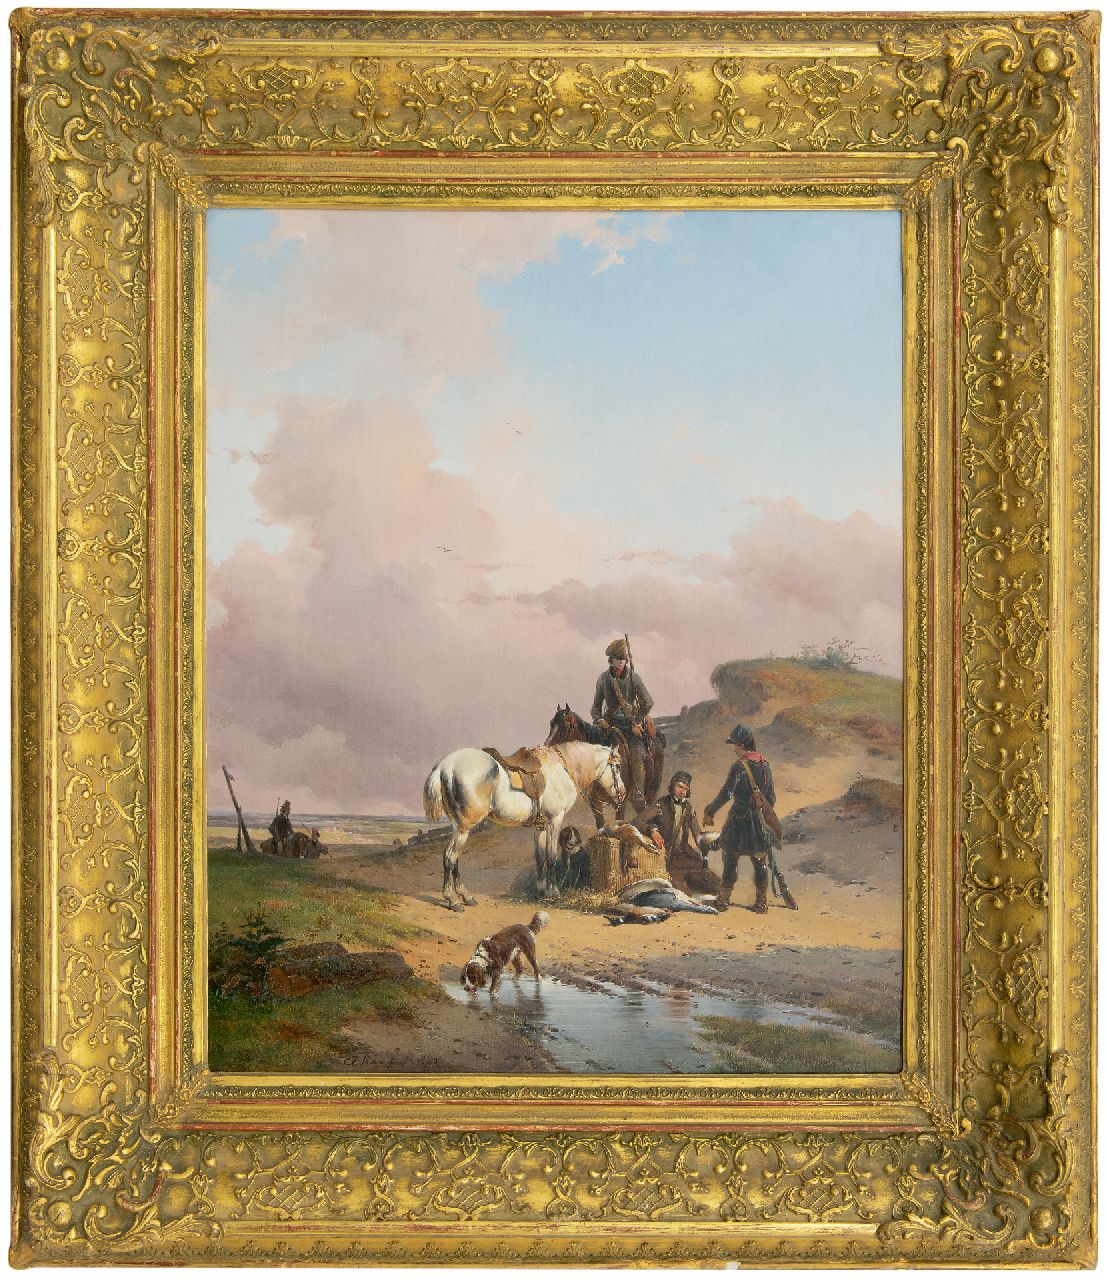 Moerenhout J.J.  | Josephus Jodocus 'Joseph' Moerenhout | Paintings offered for sale | After the hunt, oil on canvas 65.8 x 53.3 cm, signed left of the centre and dated 1840